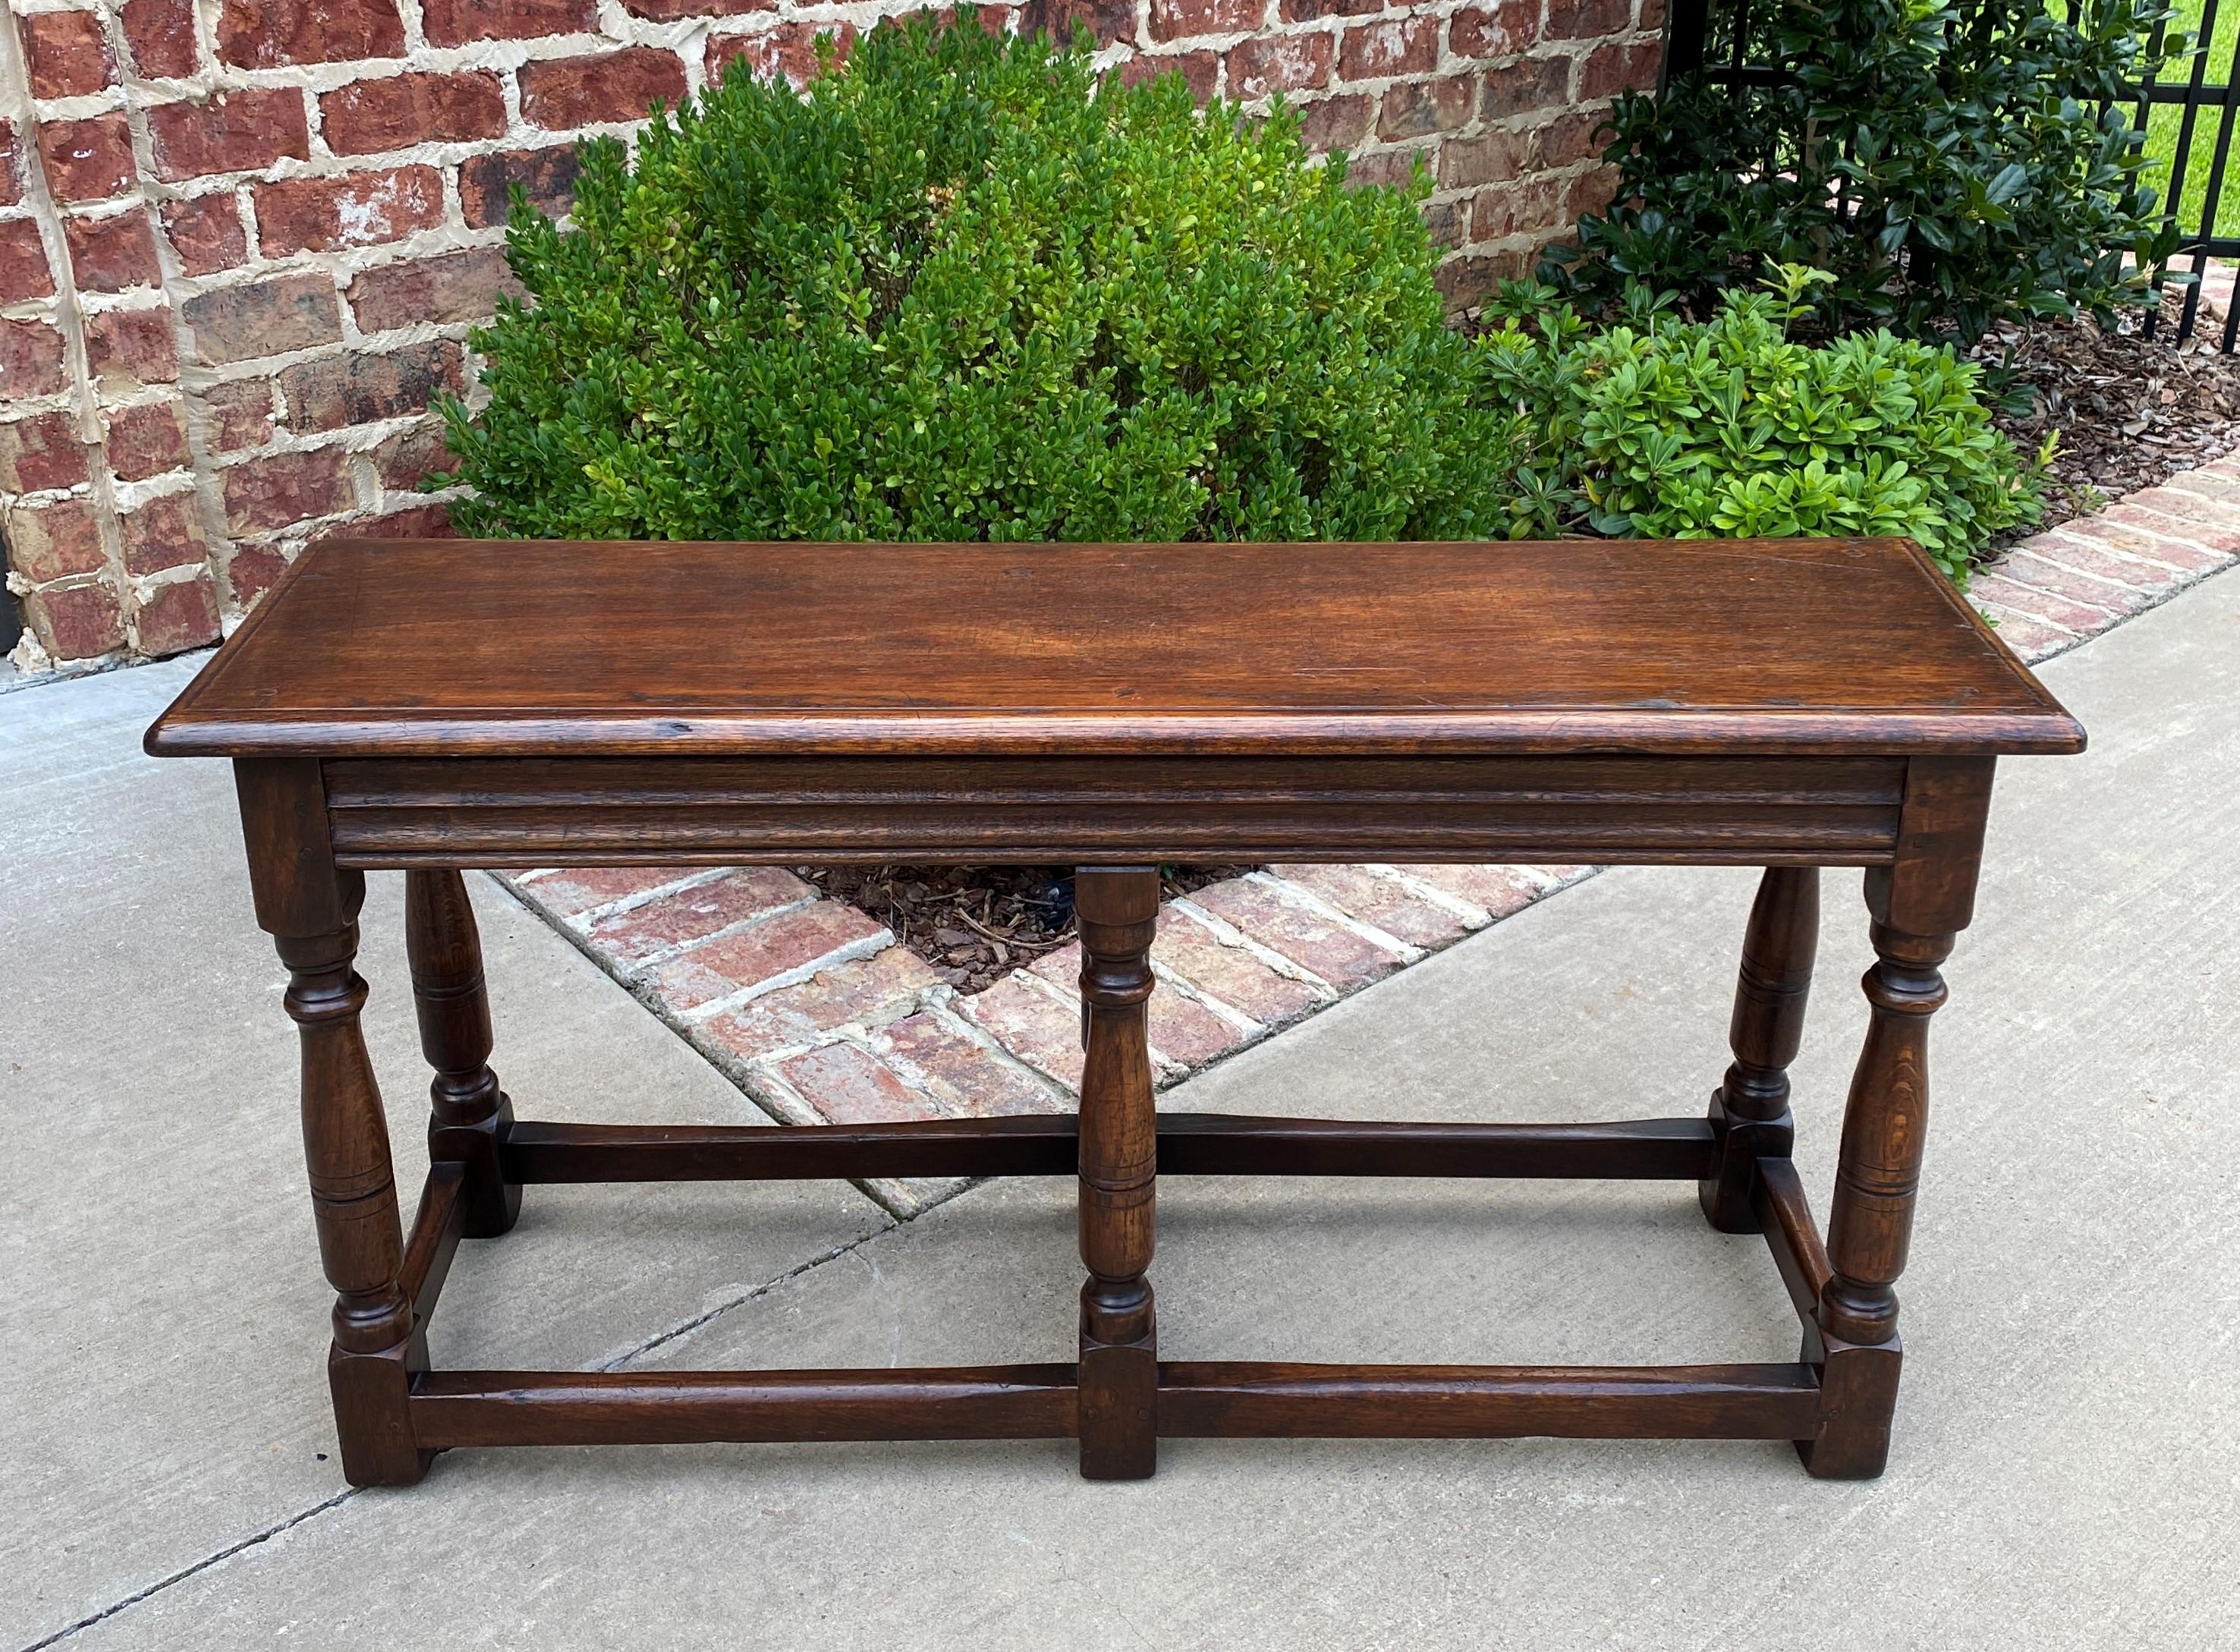 Carved Antique English Bench Stool Pegged Turned Post Oak Window Seat Narrow Depth